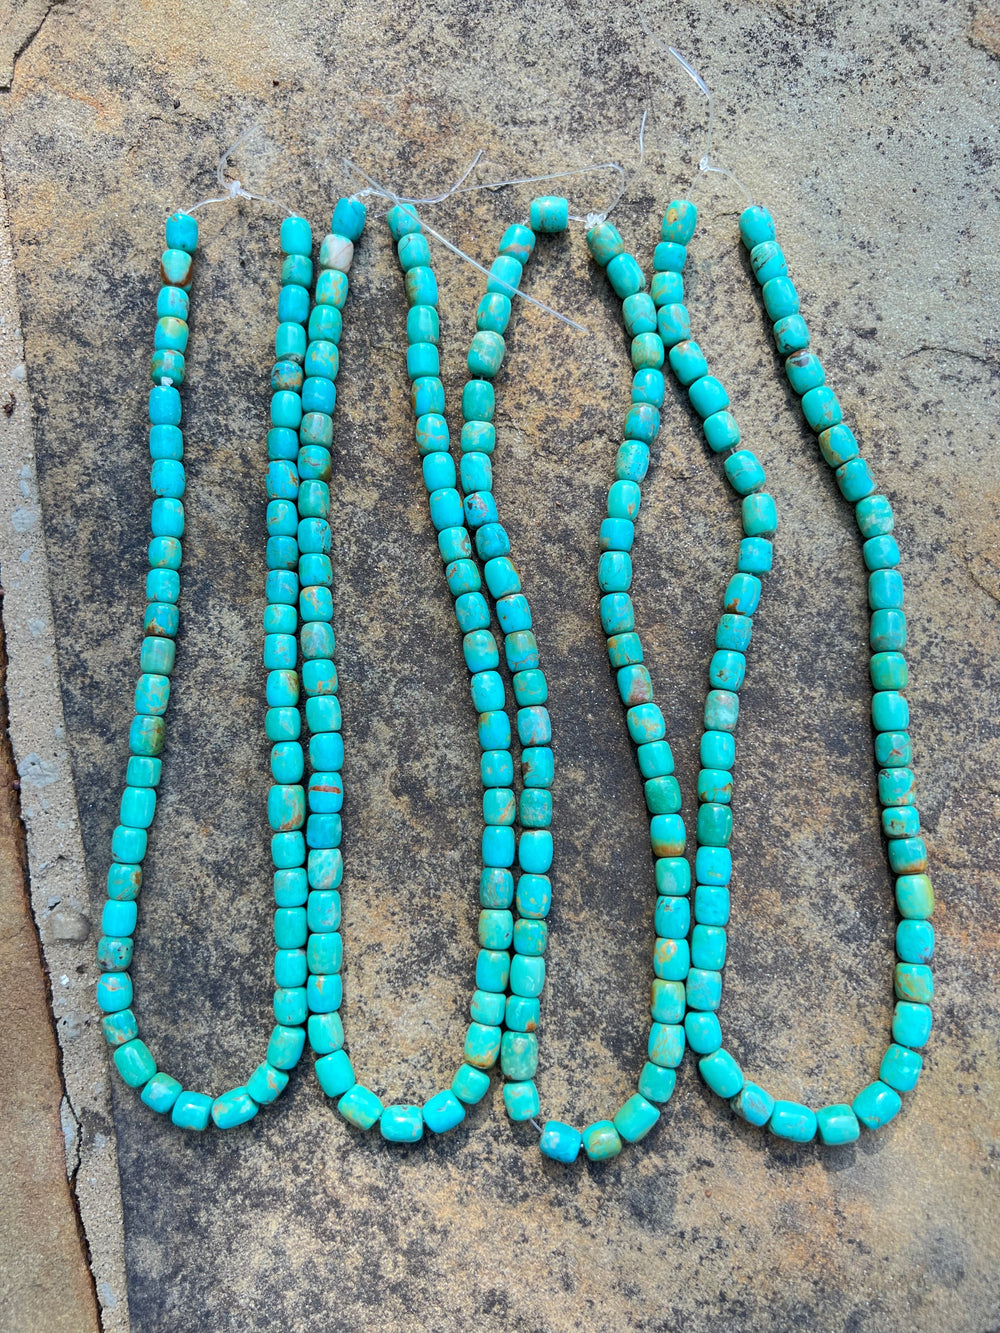 Chilean Turquoise (Chile) 7x8mm Barrel Beads 16 inch strand